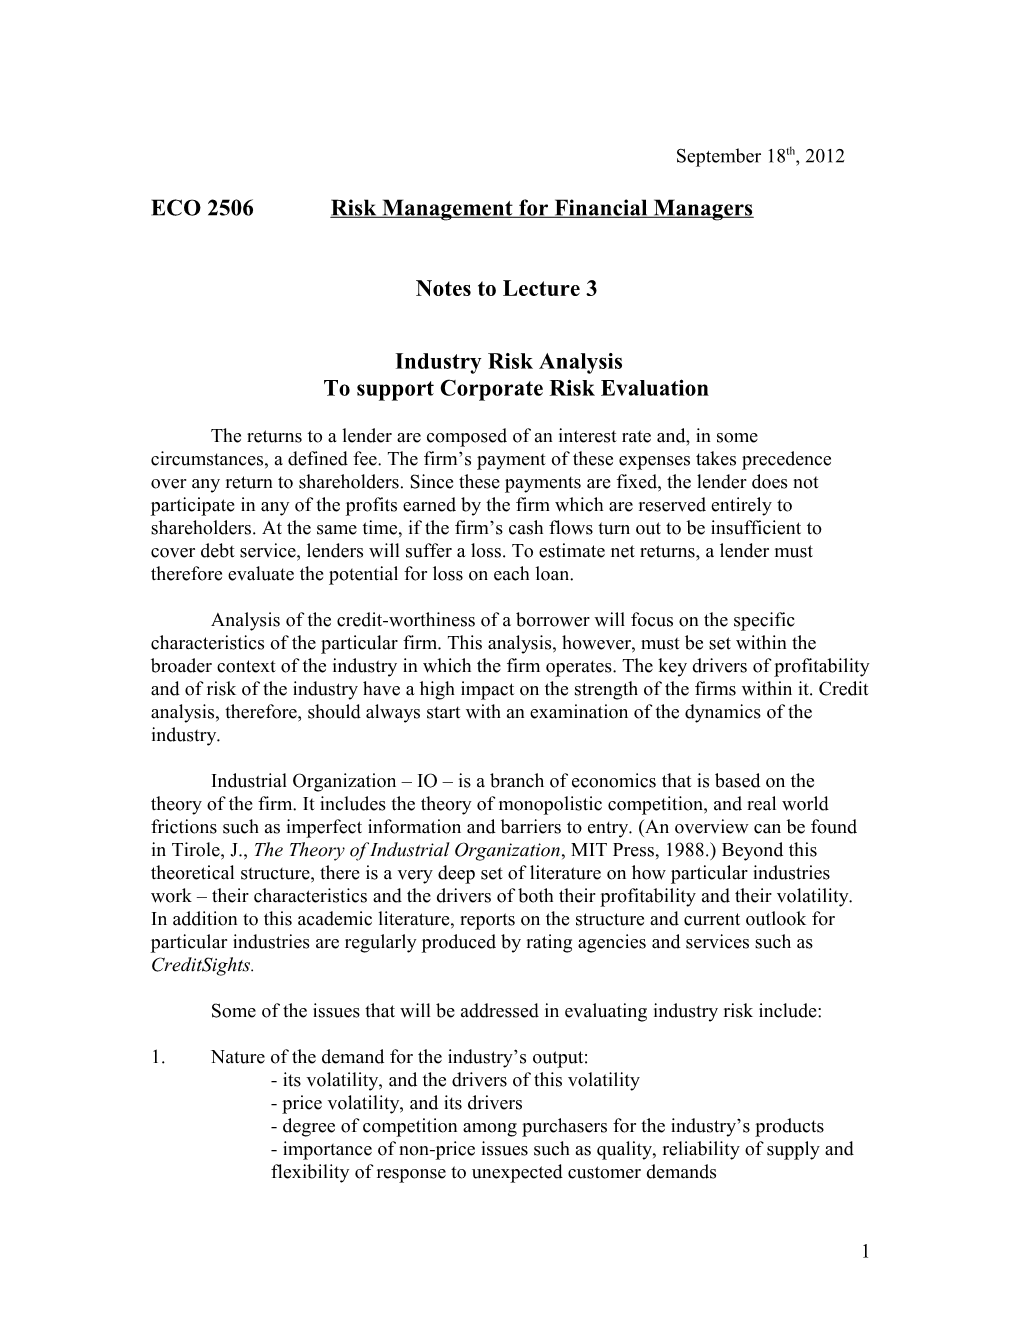 Eco2506risk Management for Financial Managers